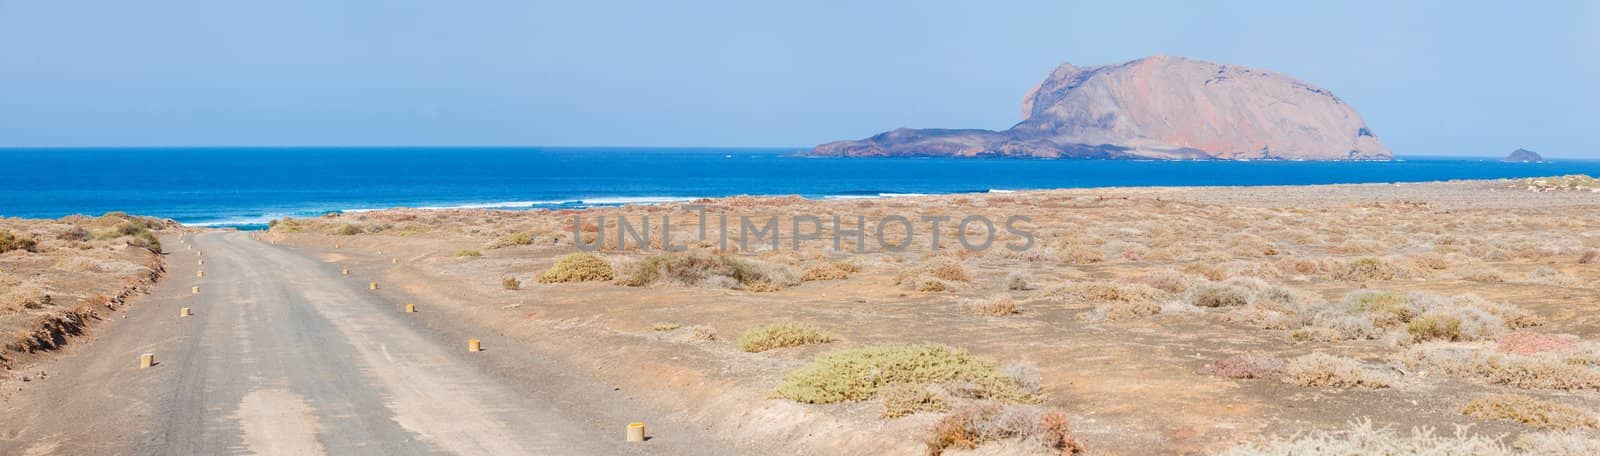 scenic road on the island Lanzarote by maxoliki